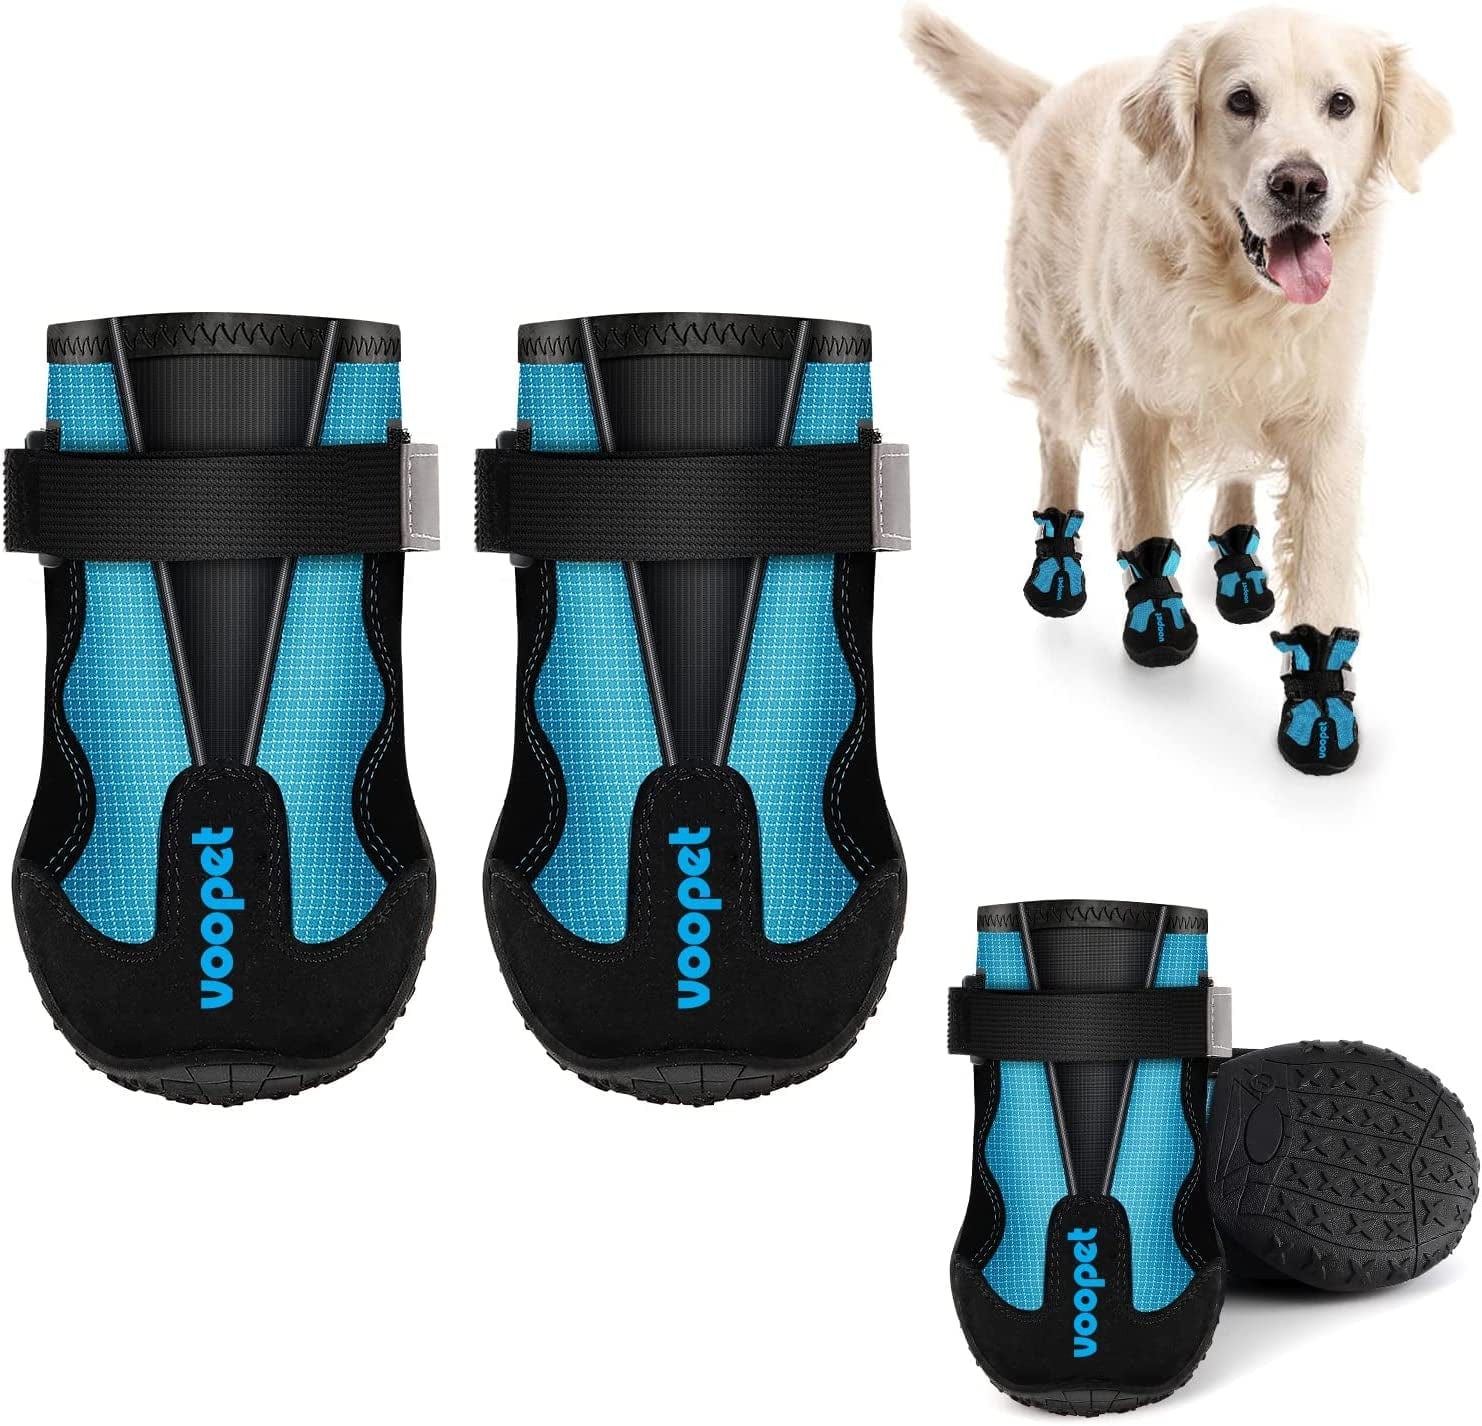 VOOPET Dog Booties for Hot Pavement Dog Shoes Paw Protectors